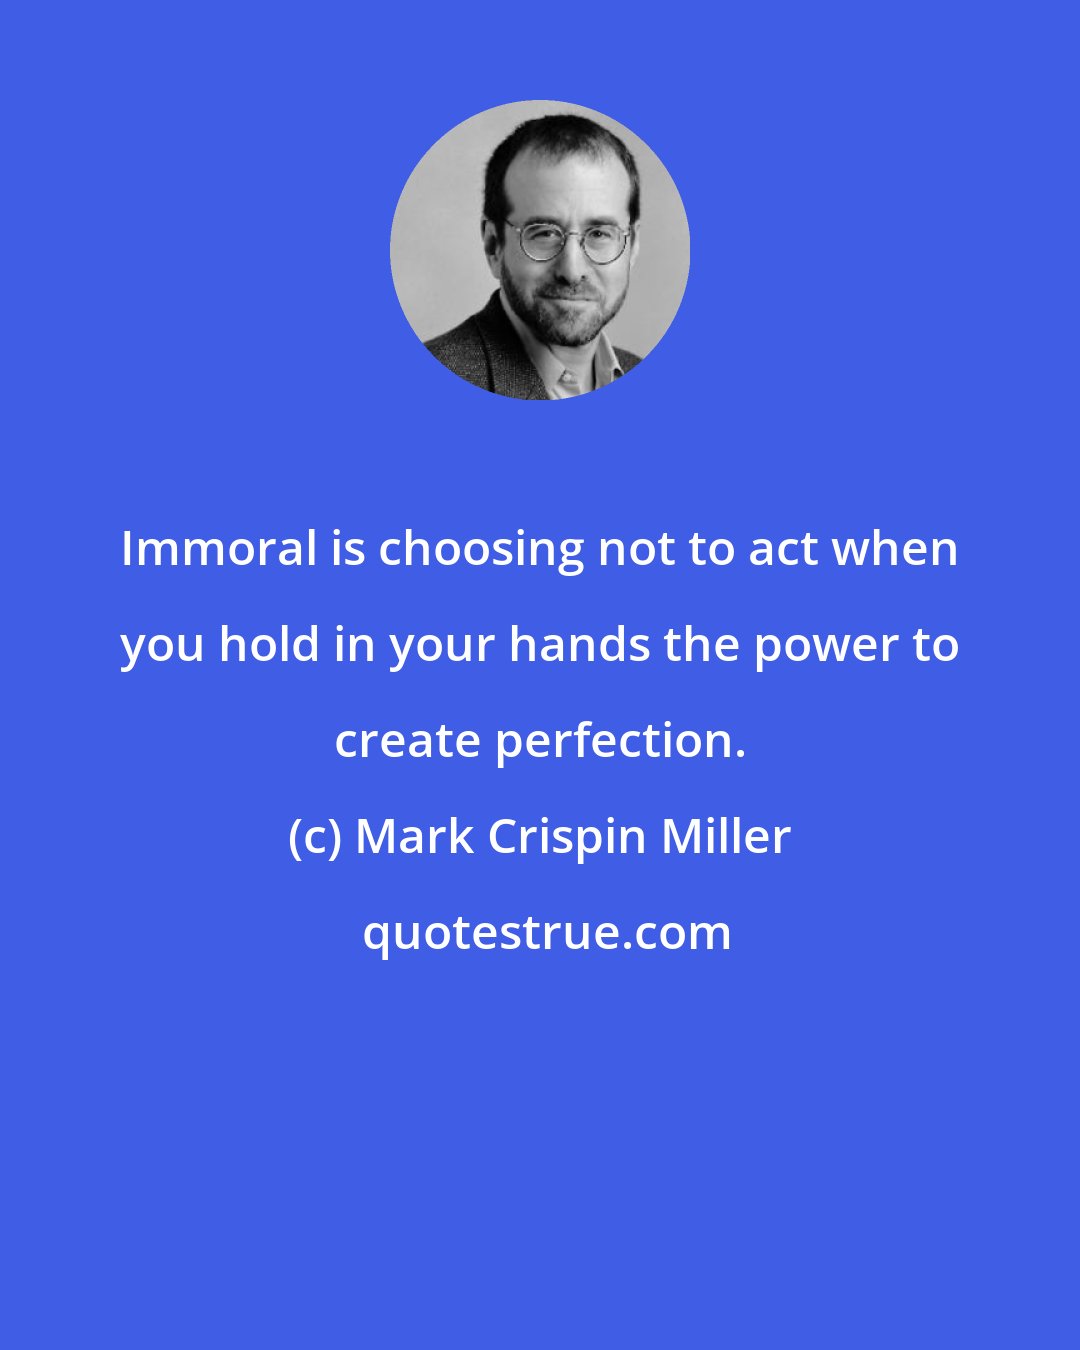 Mark Crispin Miller: Immoral is choosing not to act when you hold in your hands the power to create perfection.